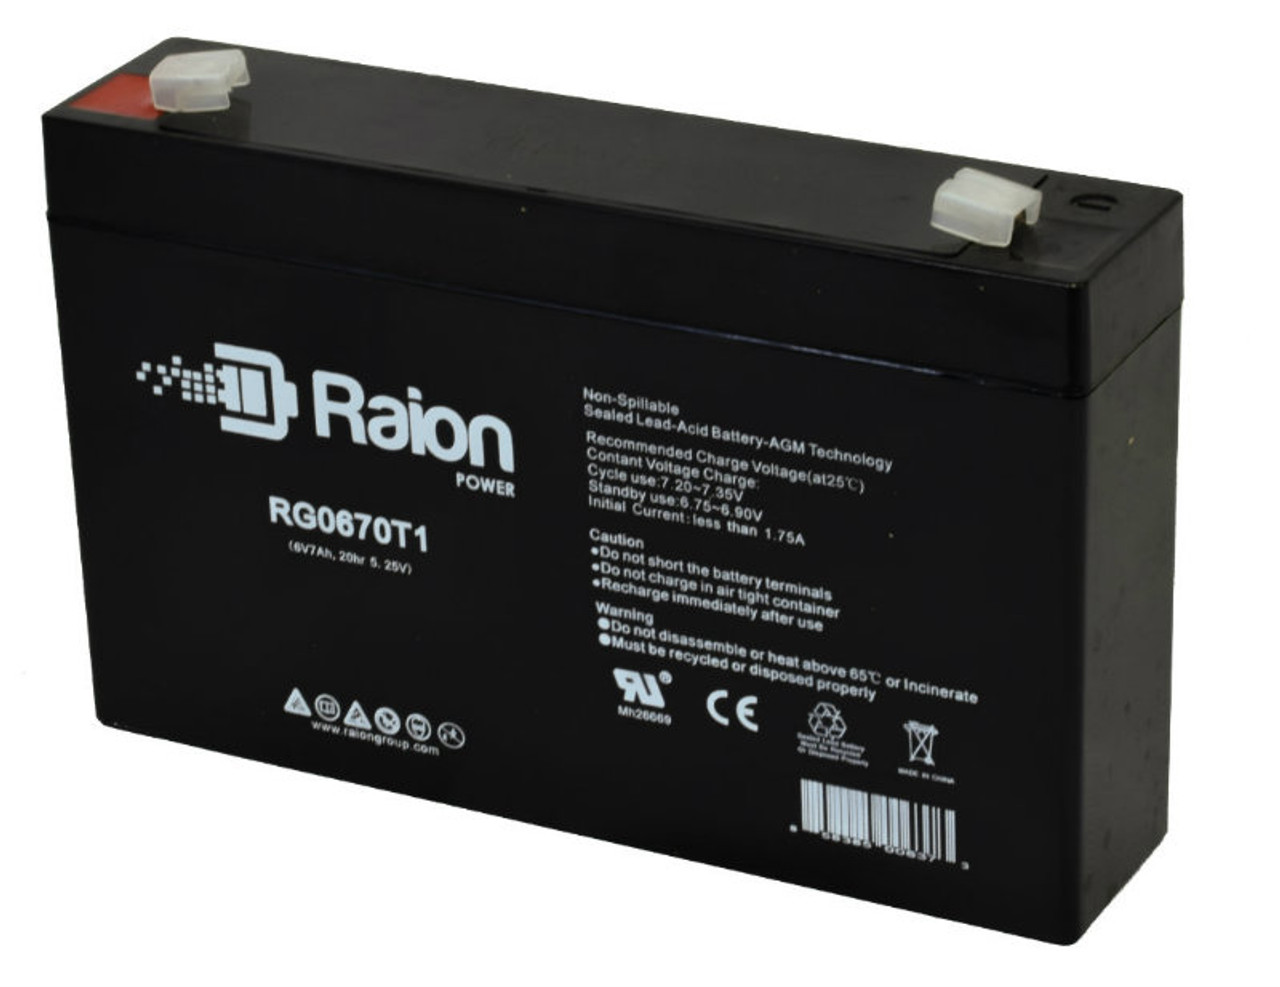 Raion Power RG0670T1 6V 7Ah Replacement Battery Cartridge for Philips 652007 Medical Equipment